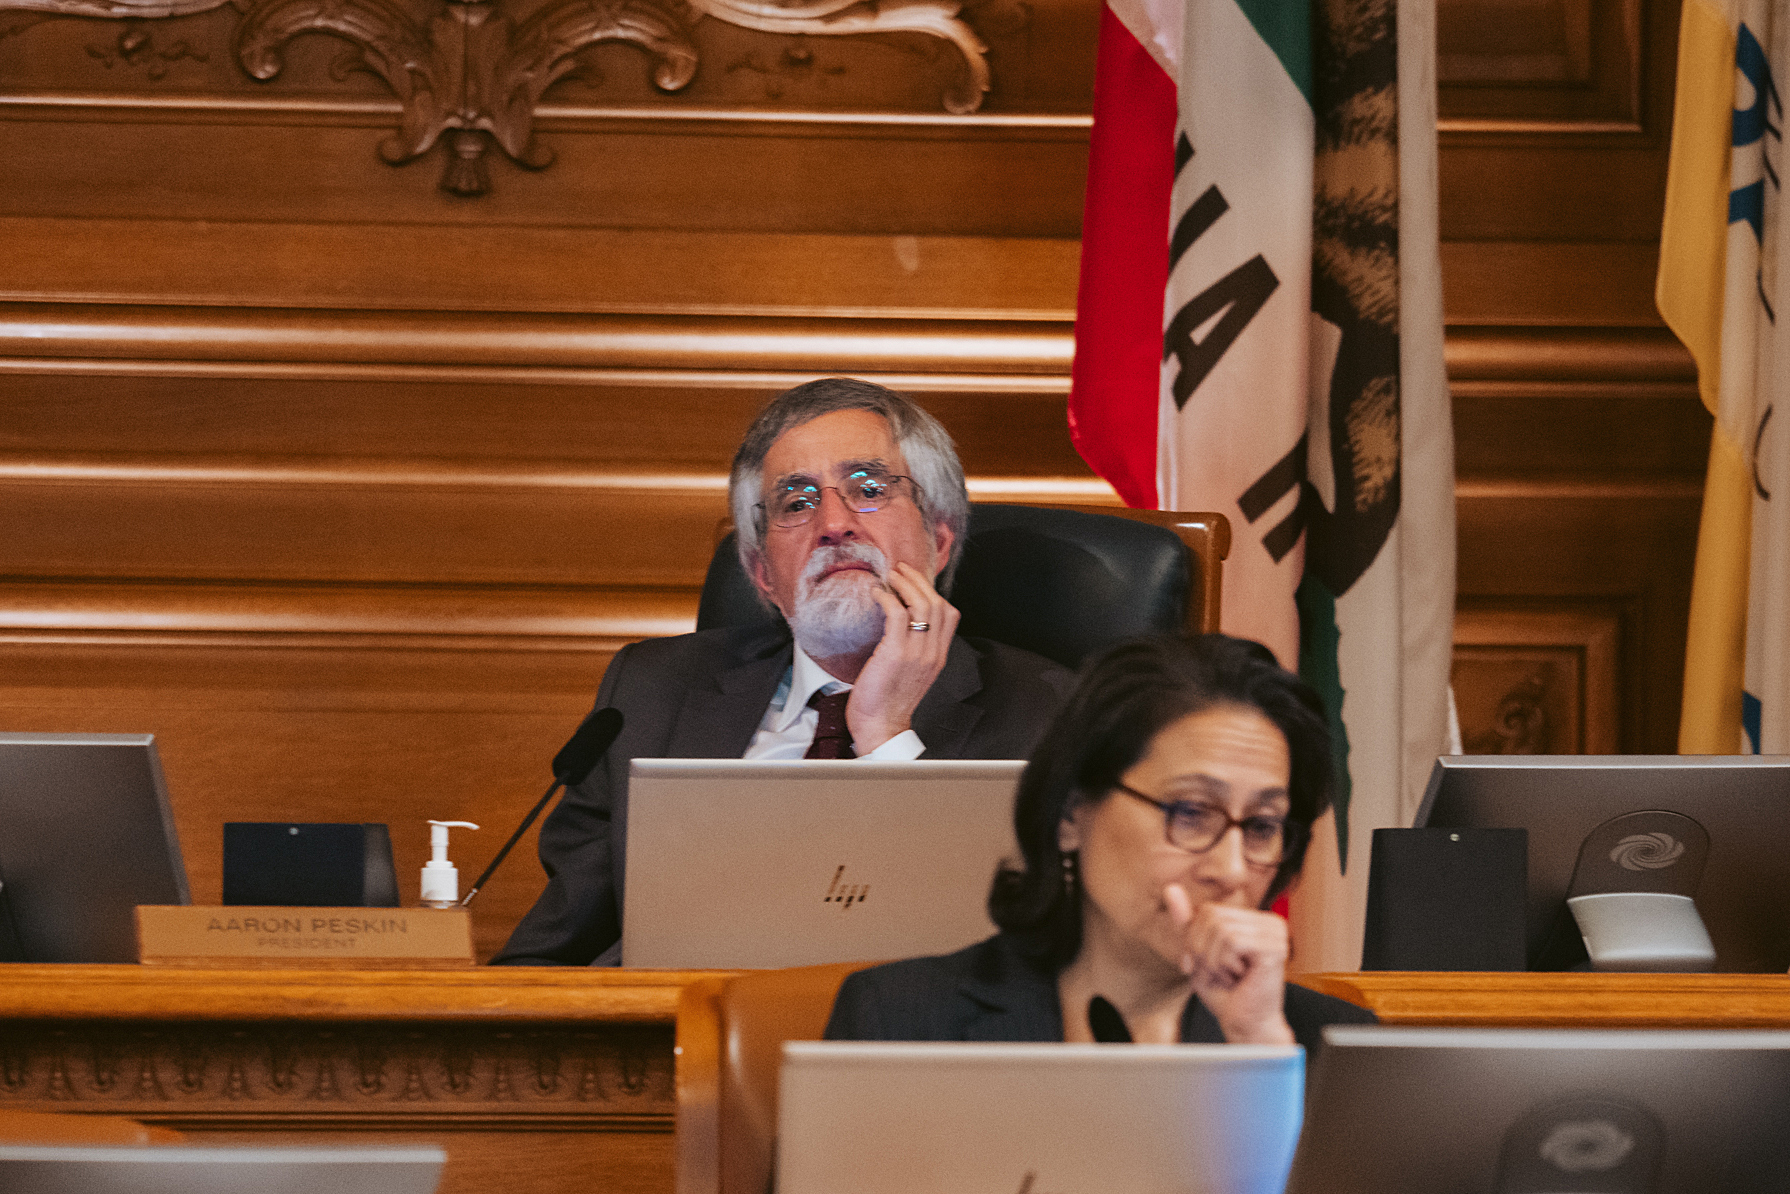 Aaron Peskin sits contemplatively in the San Francisco Board of Supervisors chambers with a hand on his chin. A woman, also absorbed, is partially visible in the foreground.